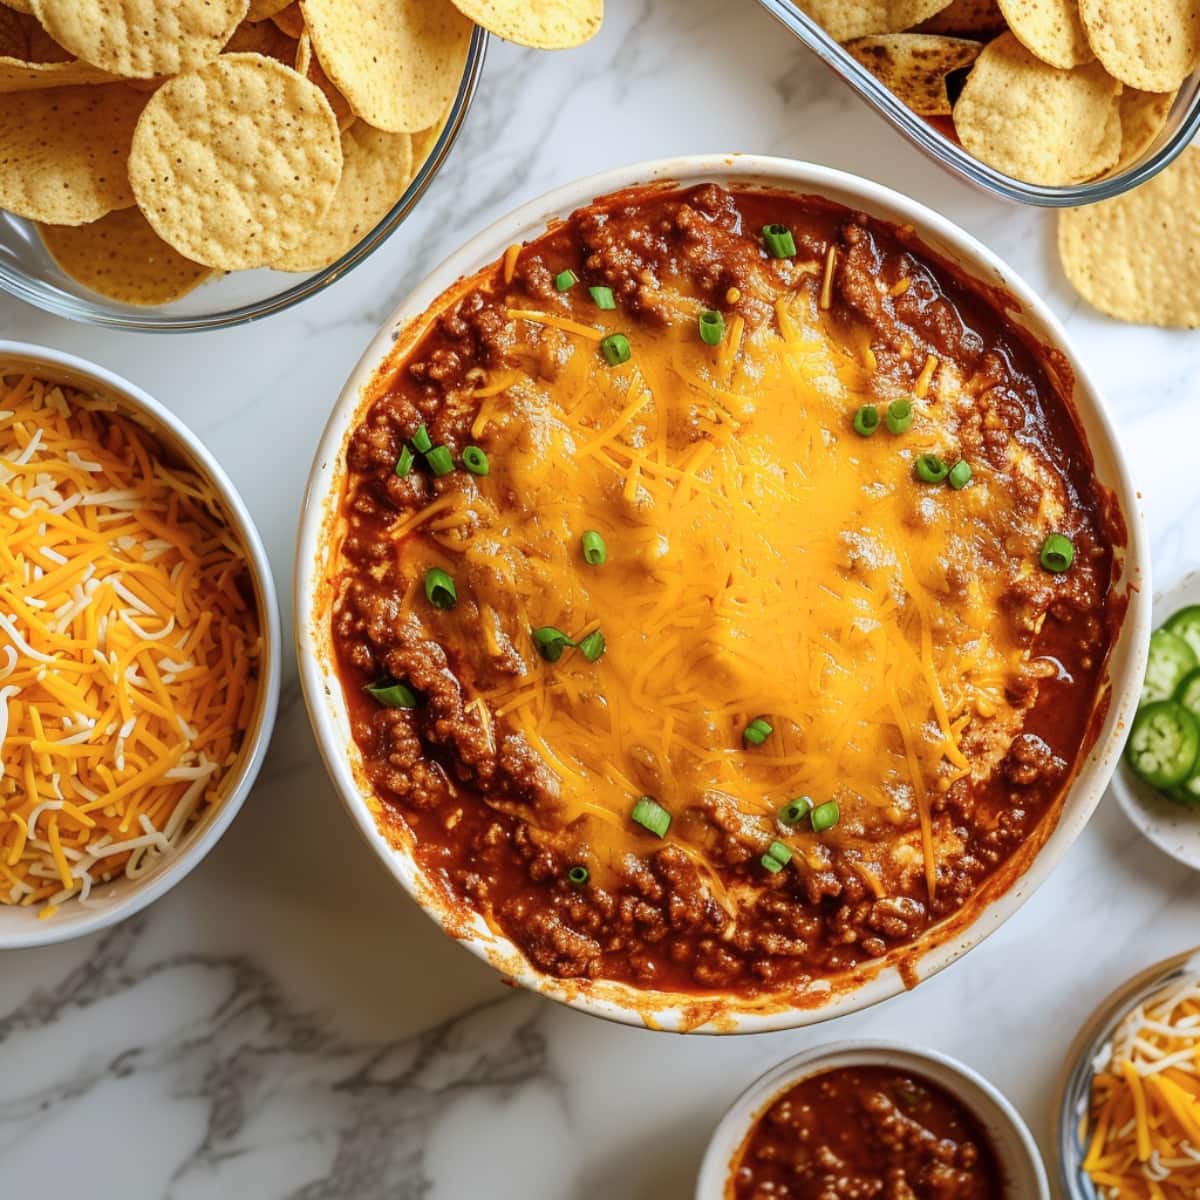 Hormel chili dip with ground beef and cheese served with nachos